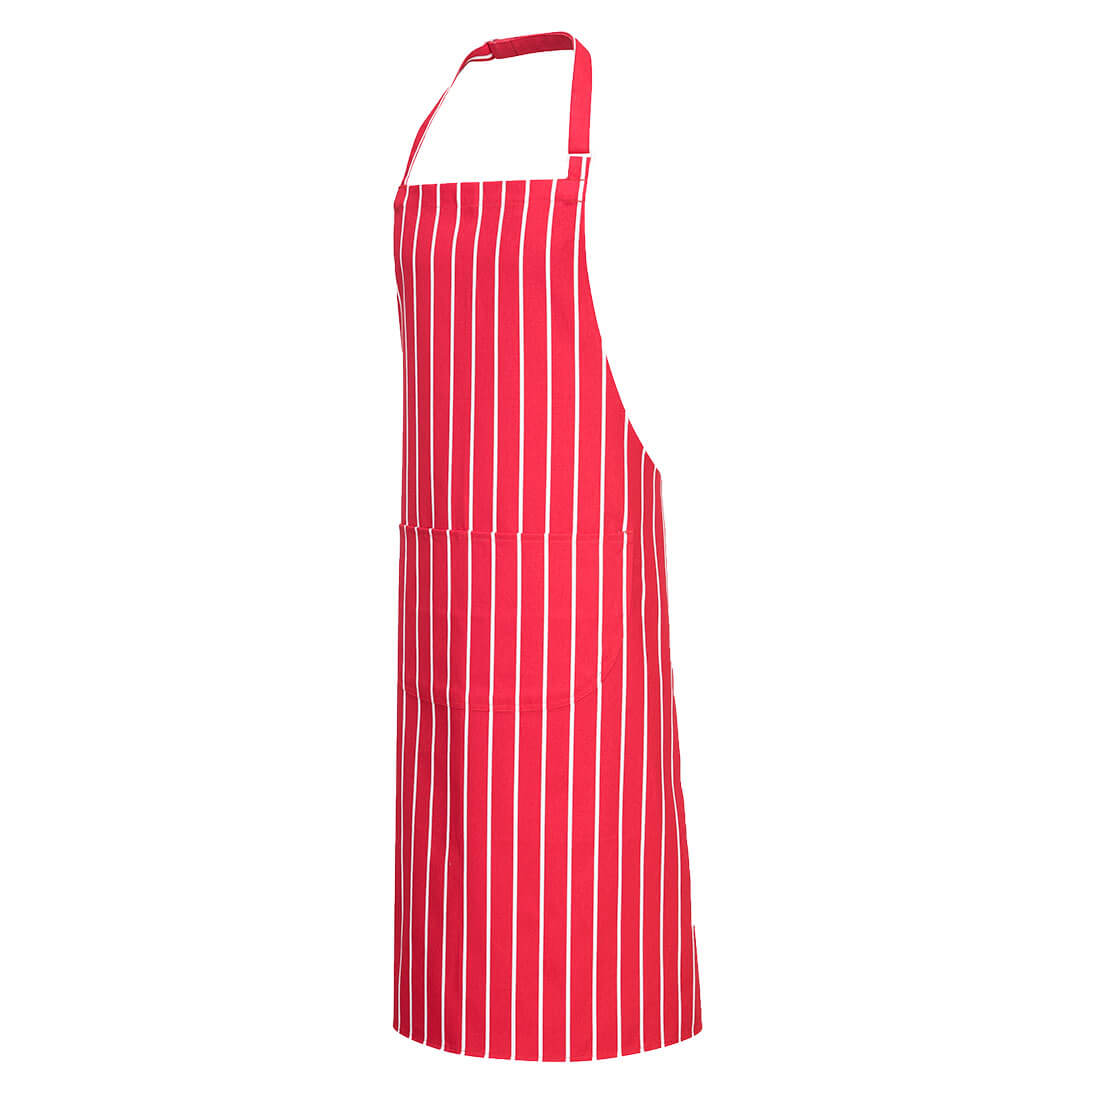 Butchers Apron with Pocket - Red or Navy